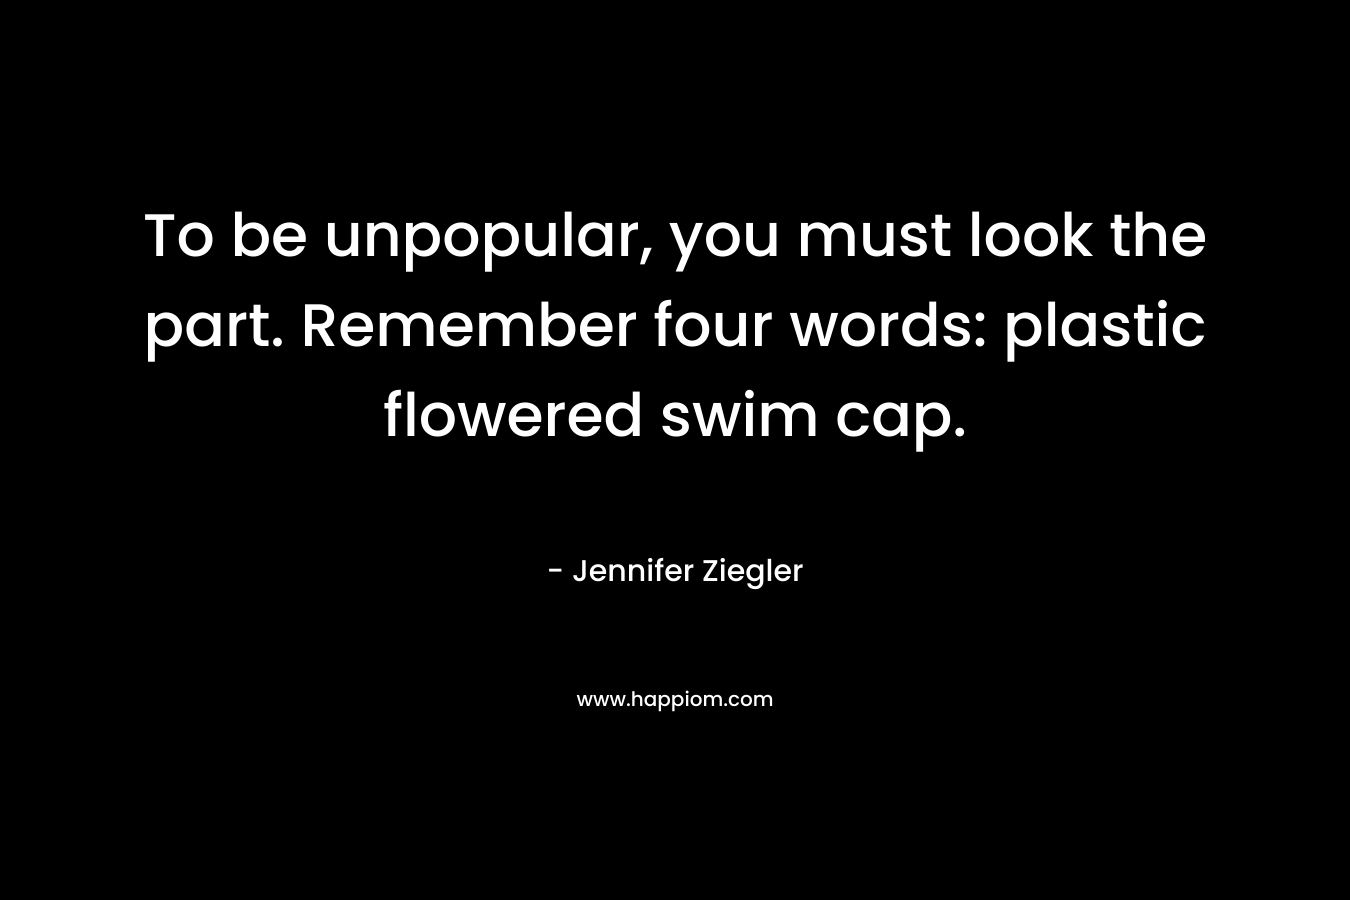 To be unpopular, you must look the part. Remember four words: plastic flowered swim cap. – Jennifer Ziegler